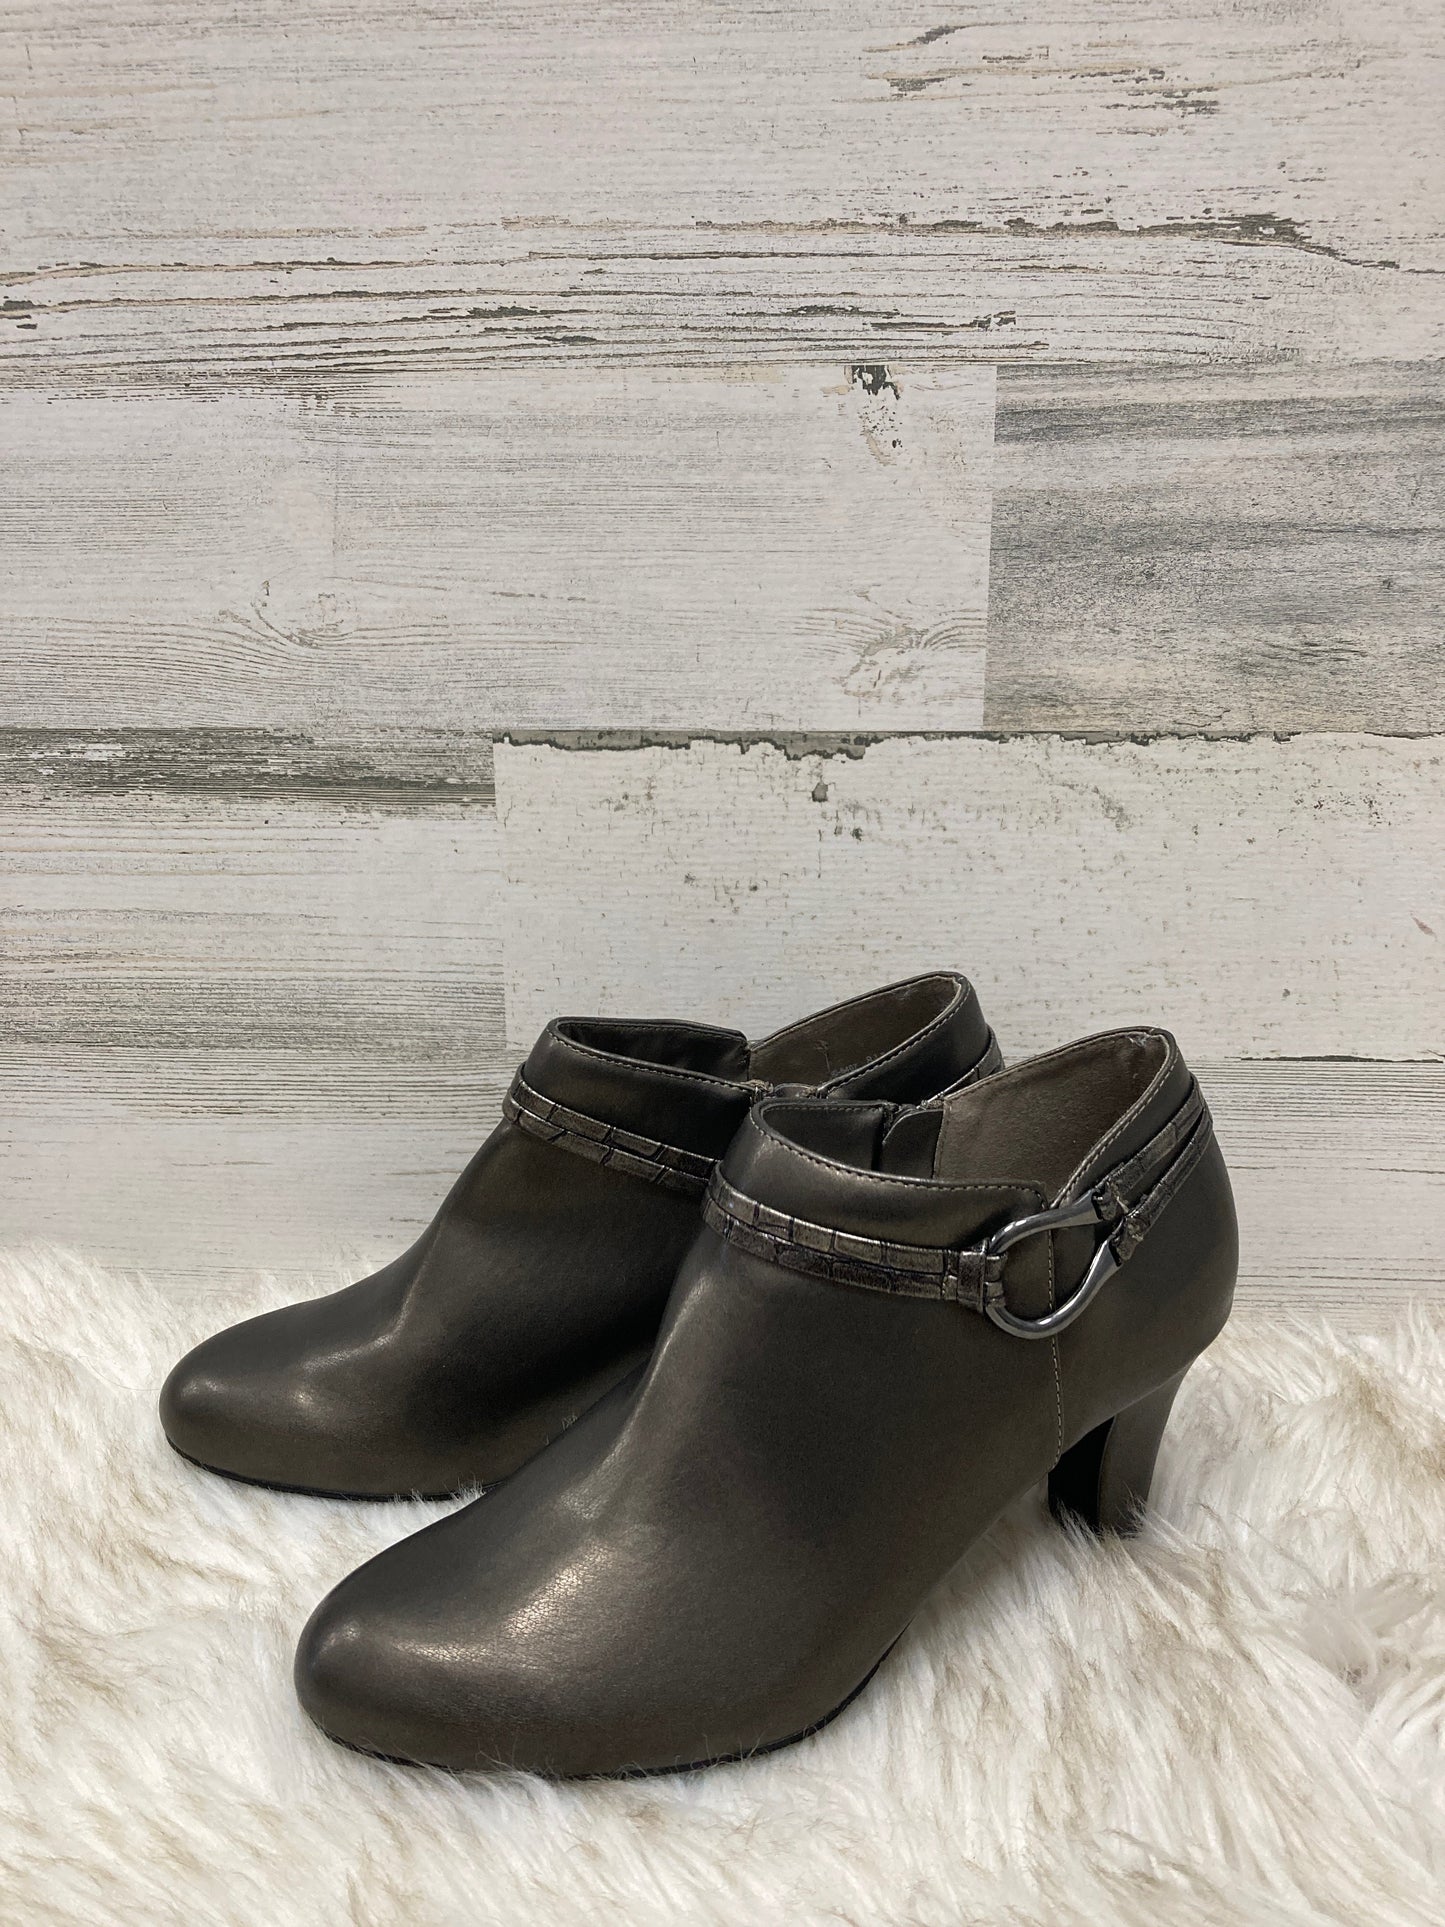 Boots Ankle Heels By Easy Street  Size: 8.5